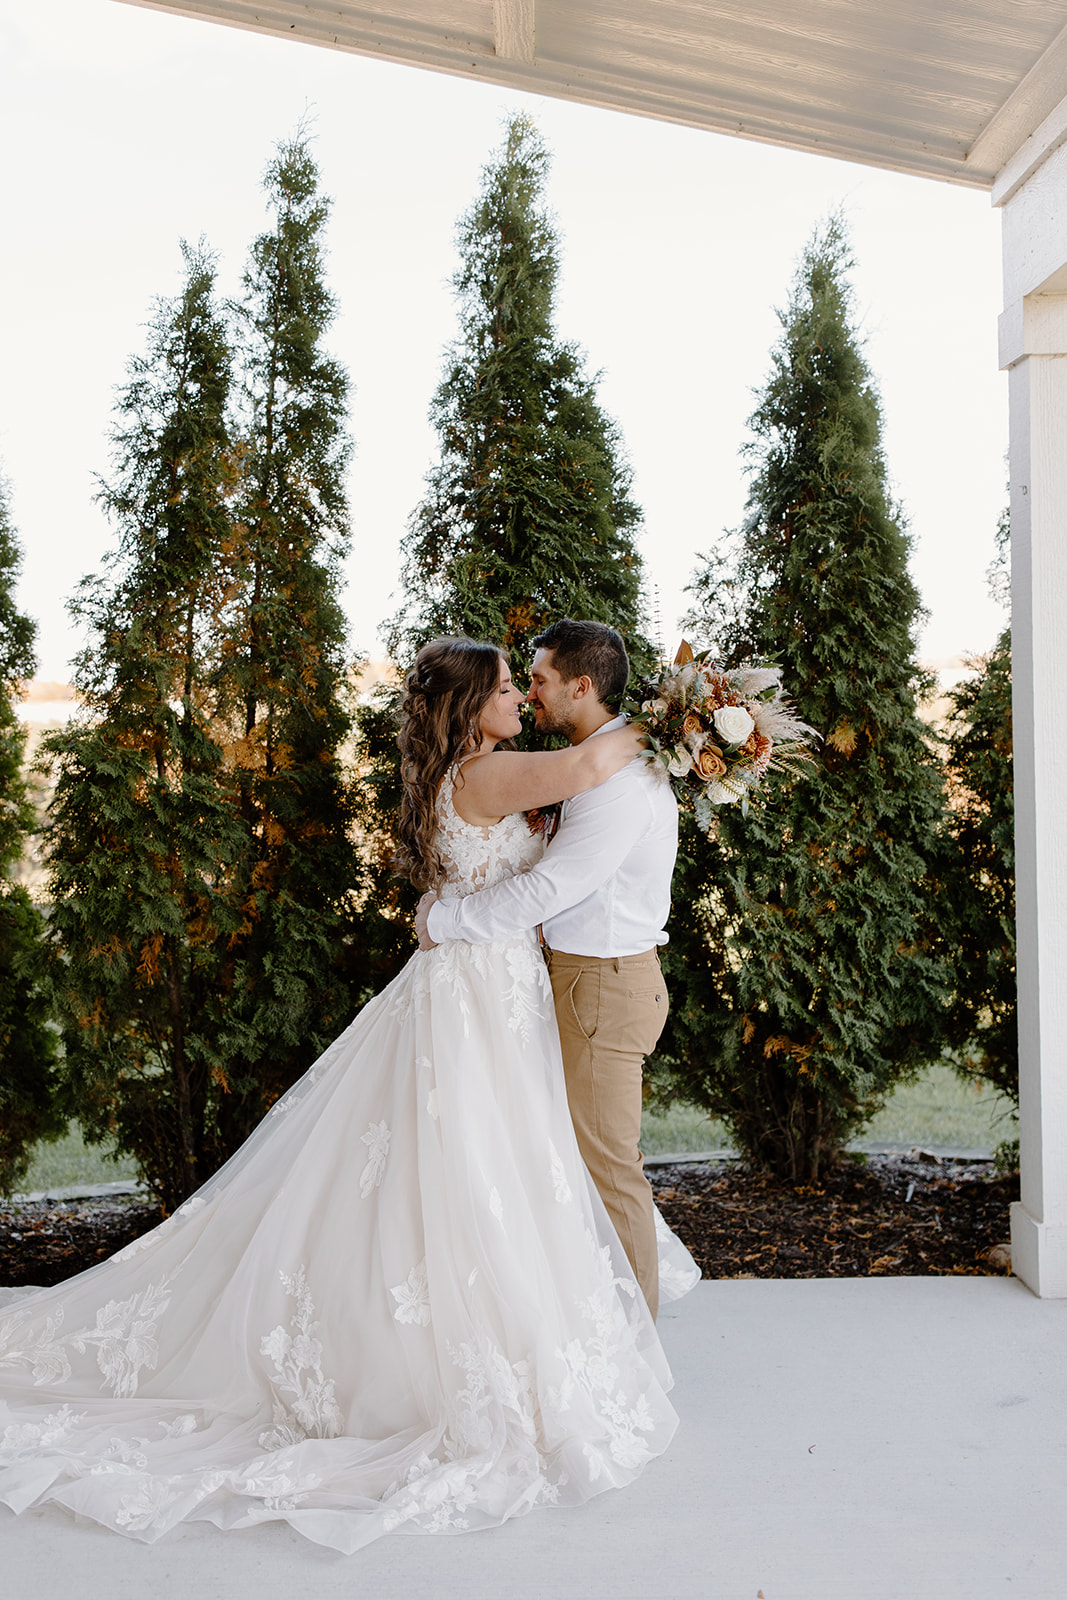 Bride and groom hug in front of trees